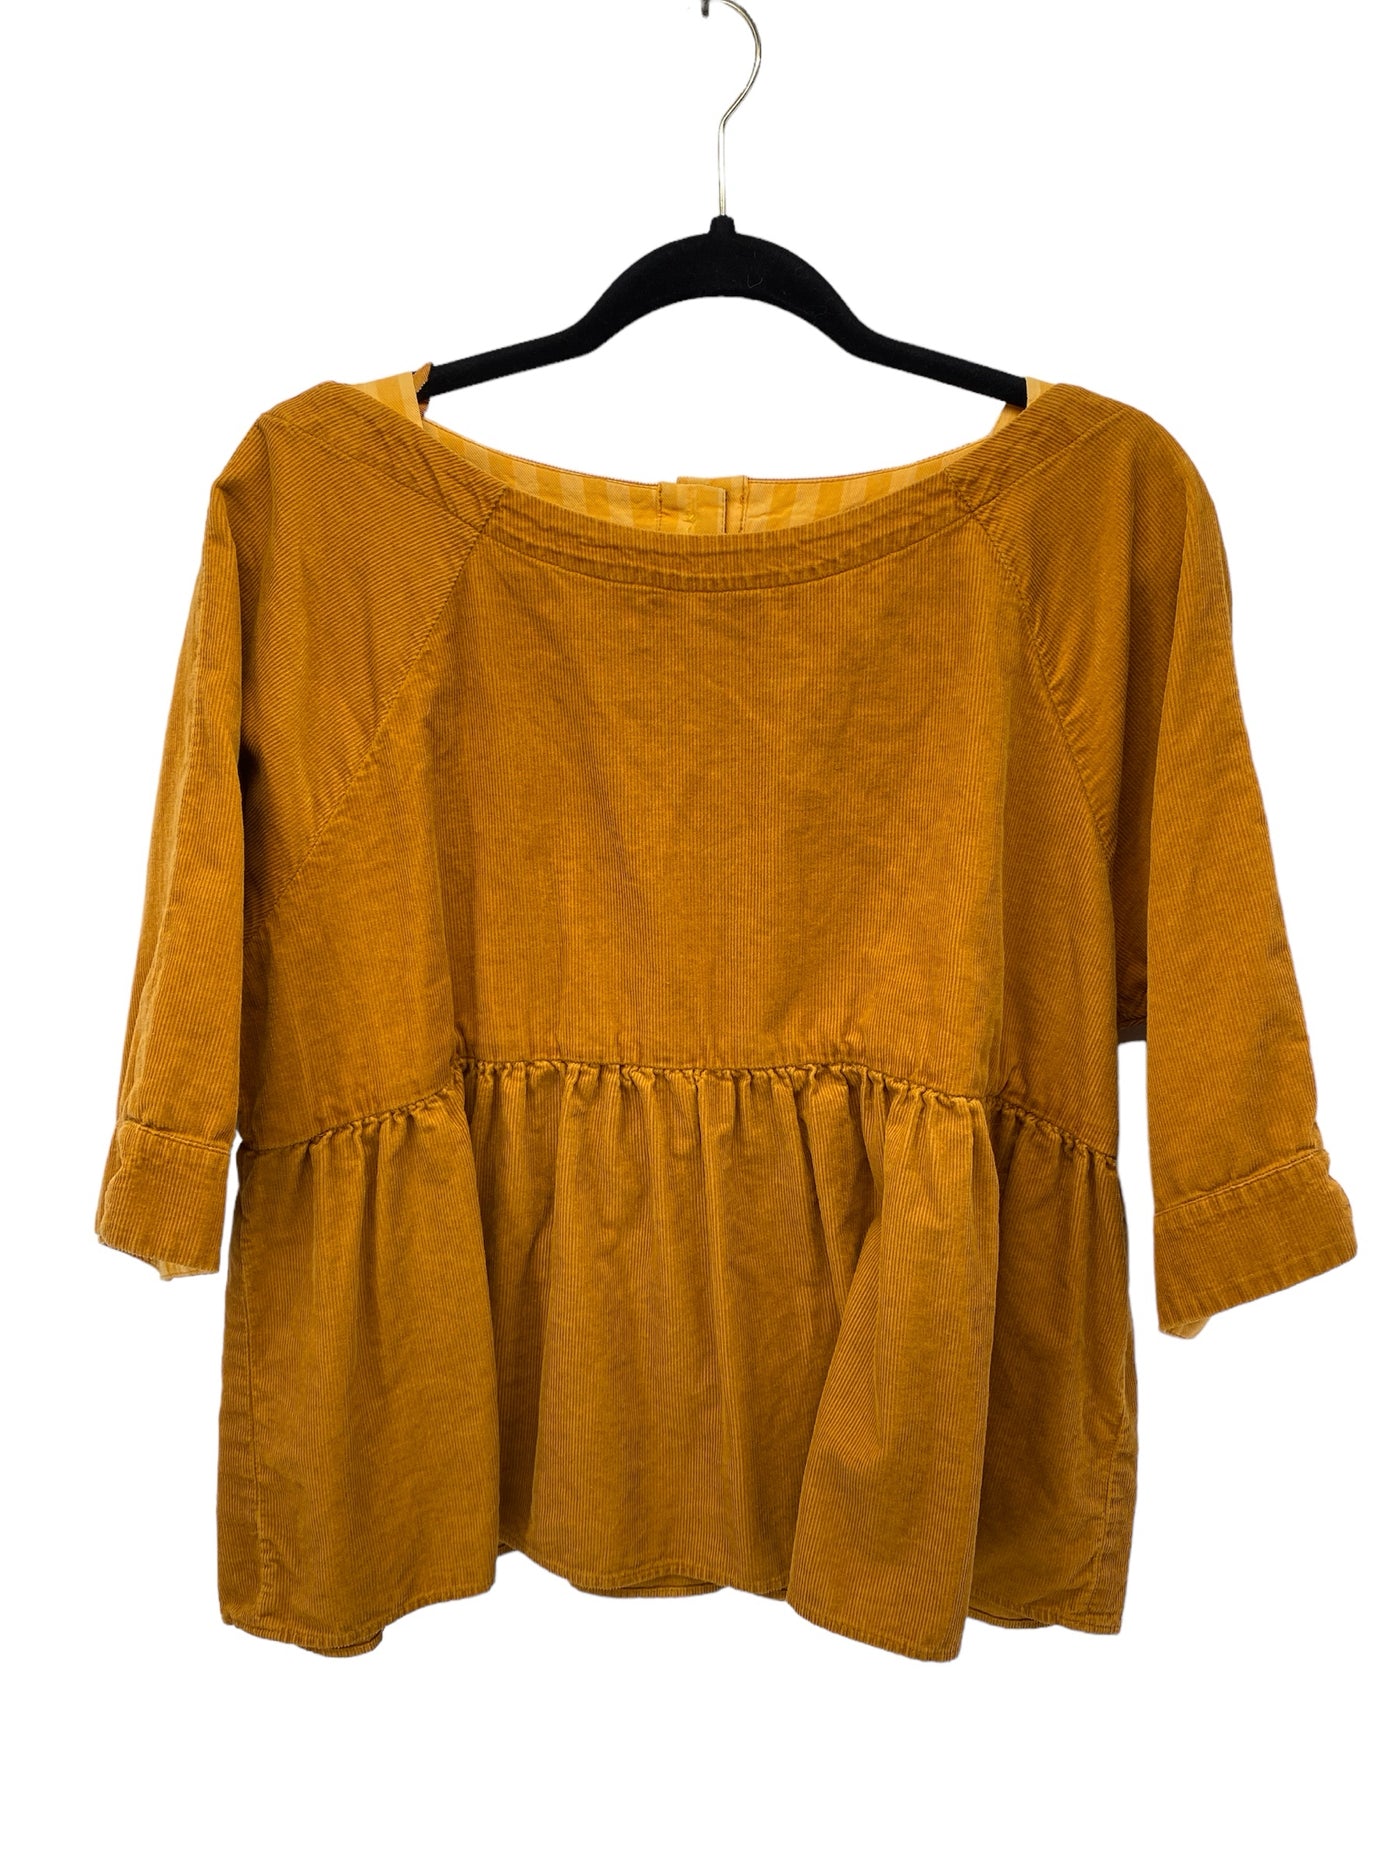 Maeve Misses Size Small mustard SS Blouse